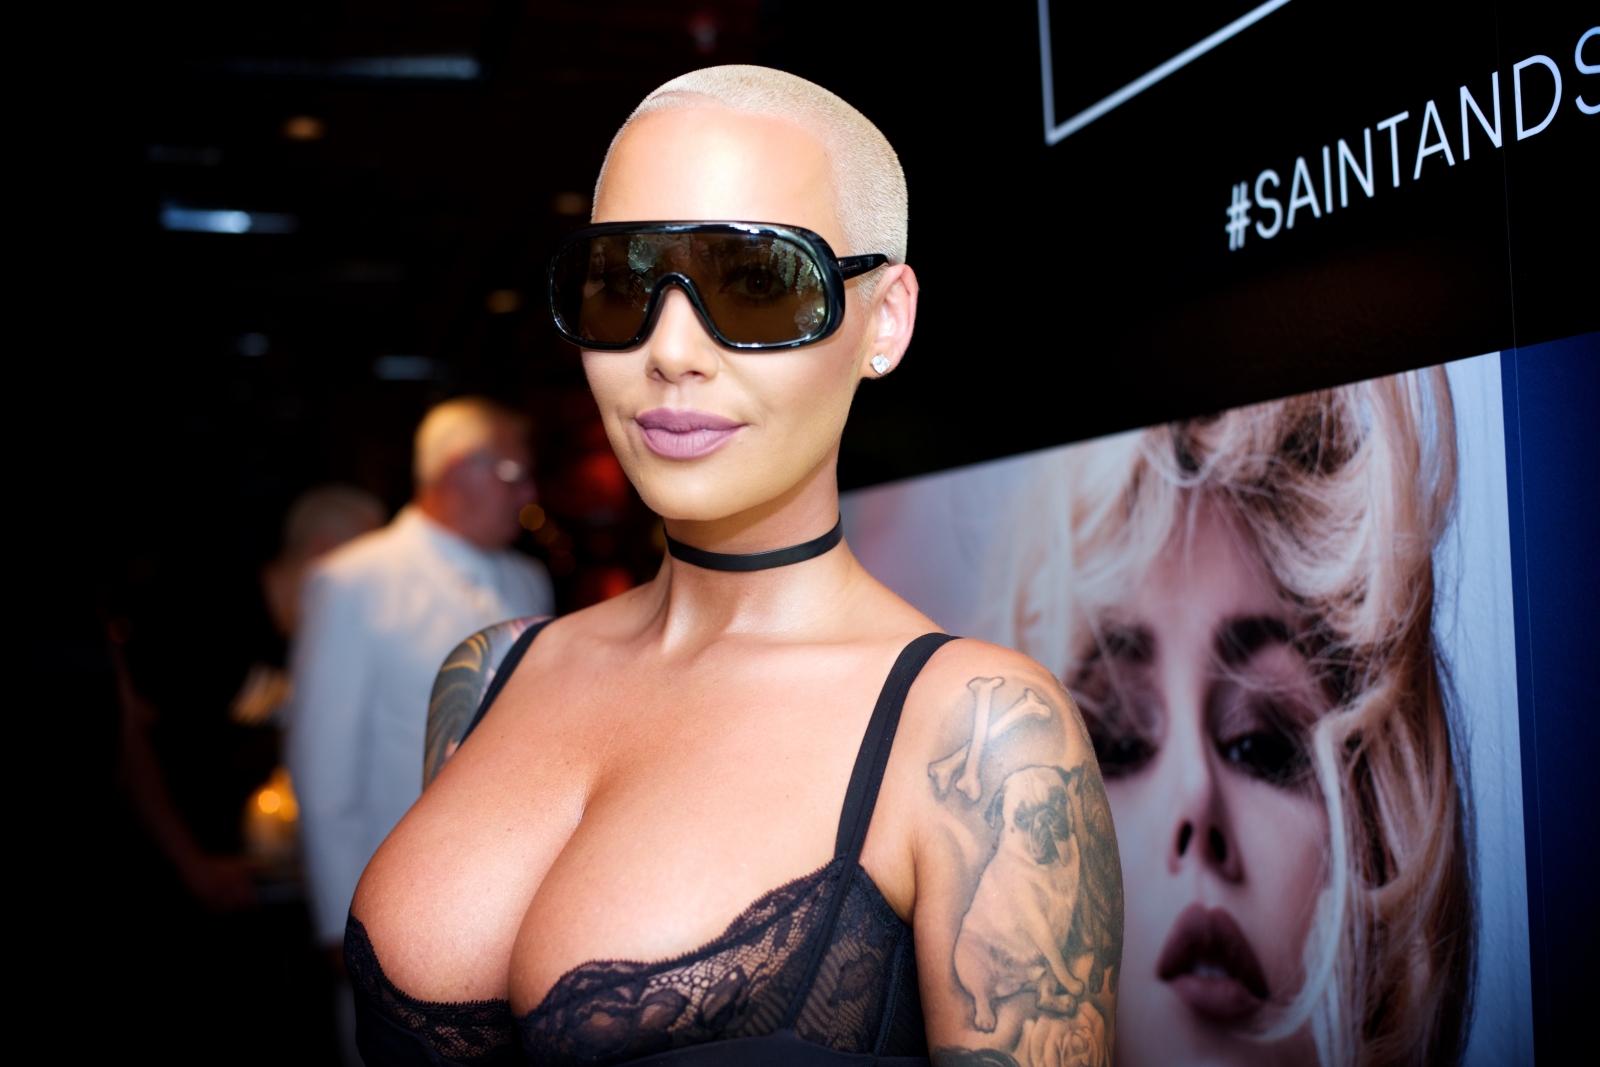 andy pereira recommends porn of amber rose pic